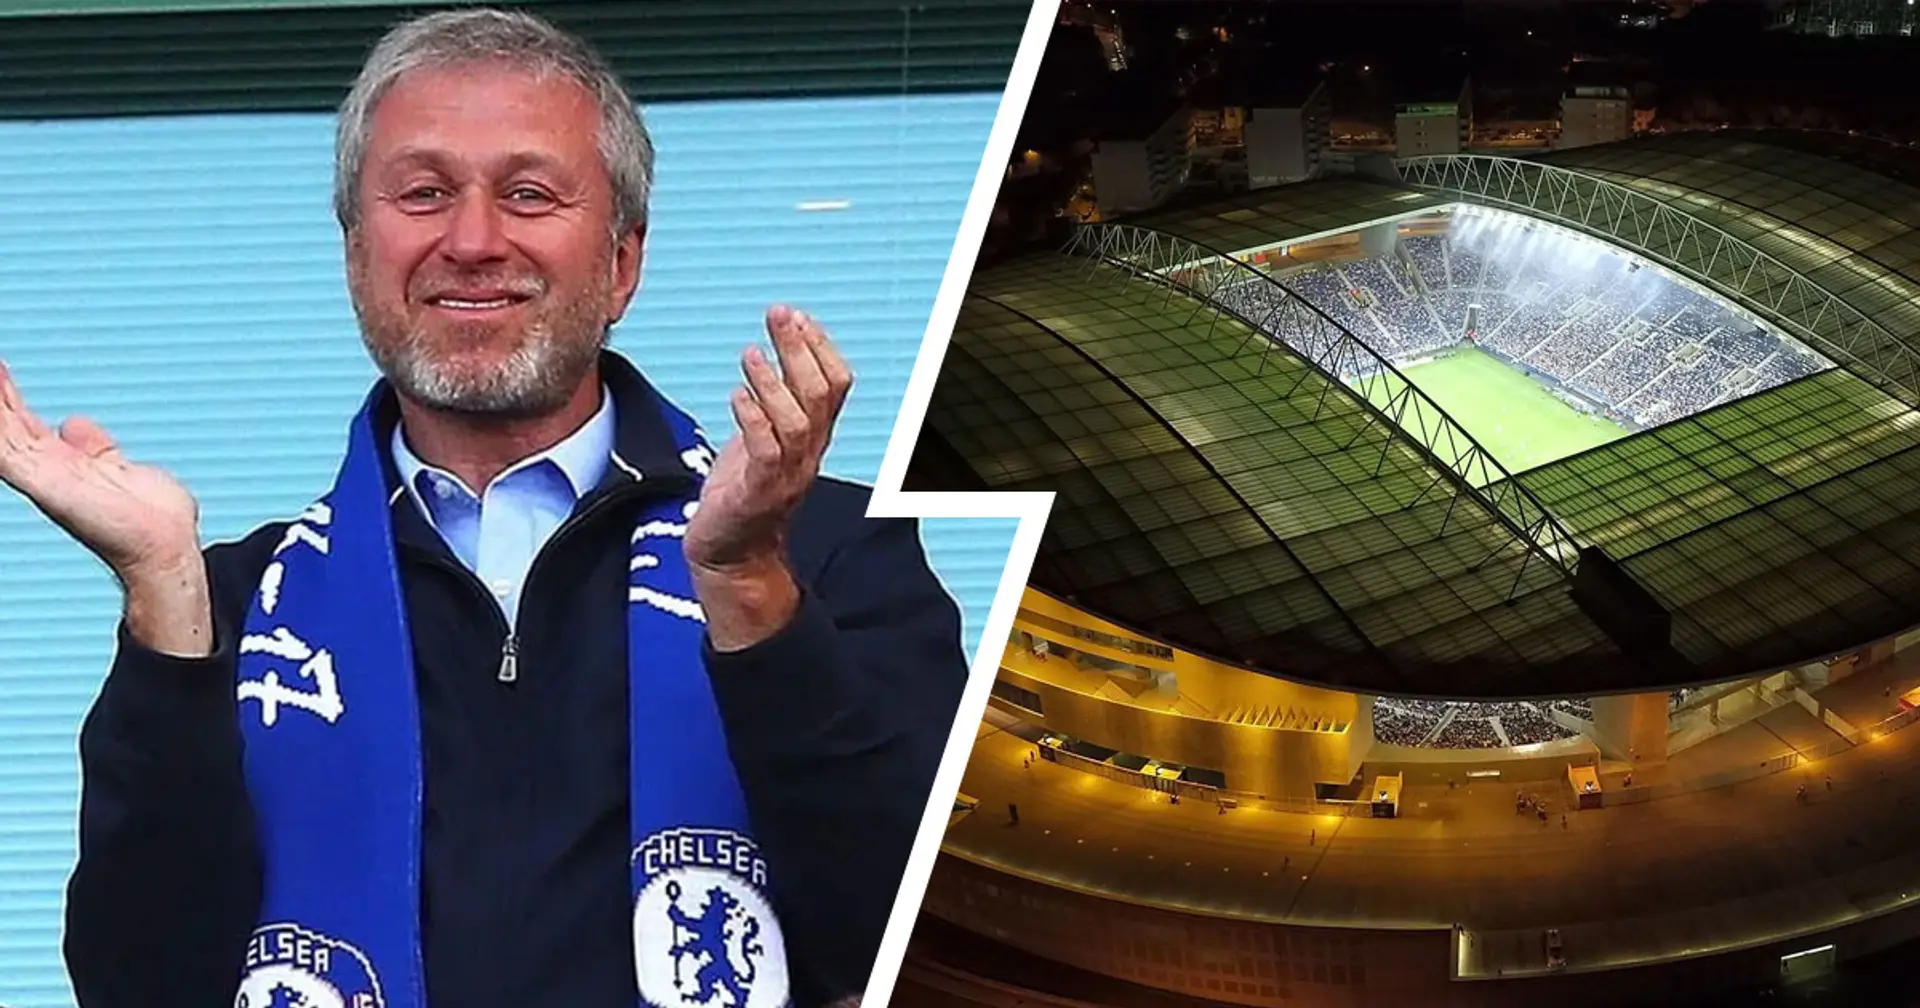 Roman Abramovich set to attend Champions League final after change of venue to Porto